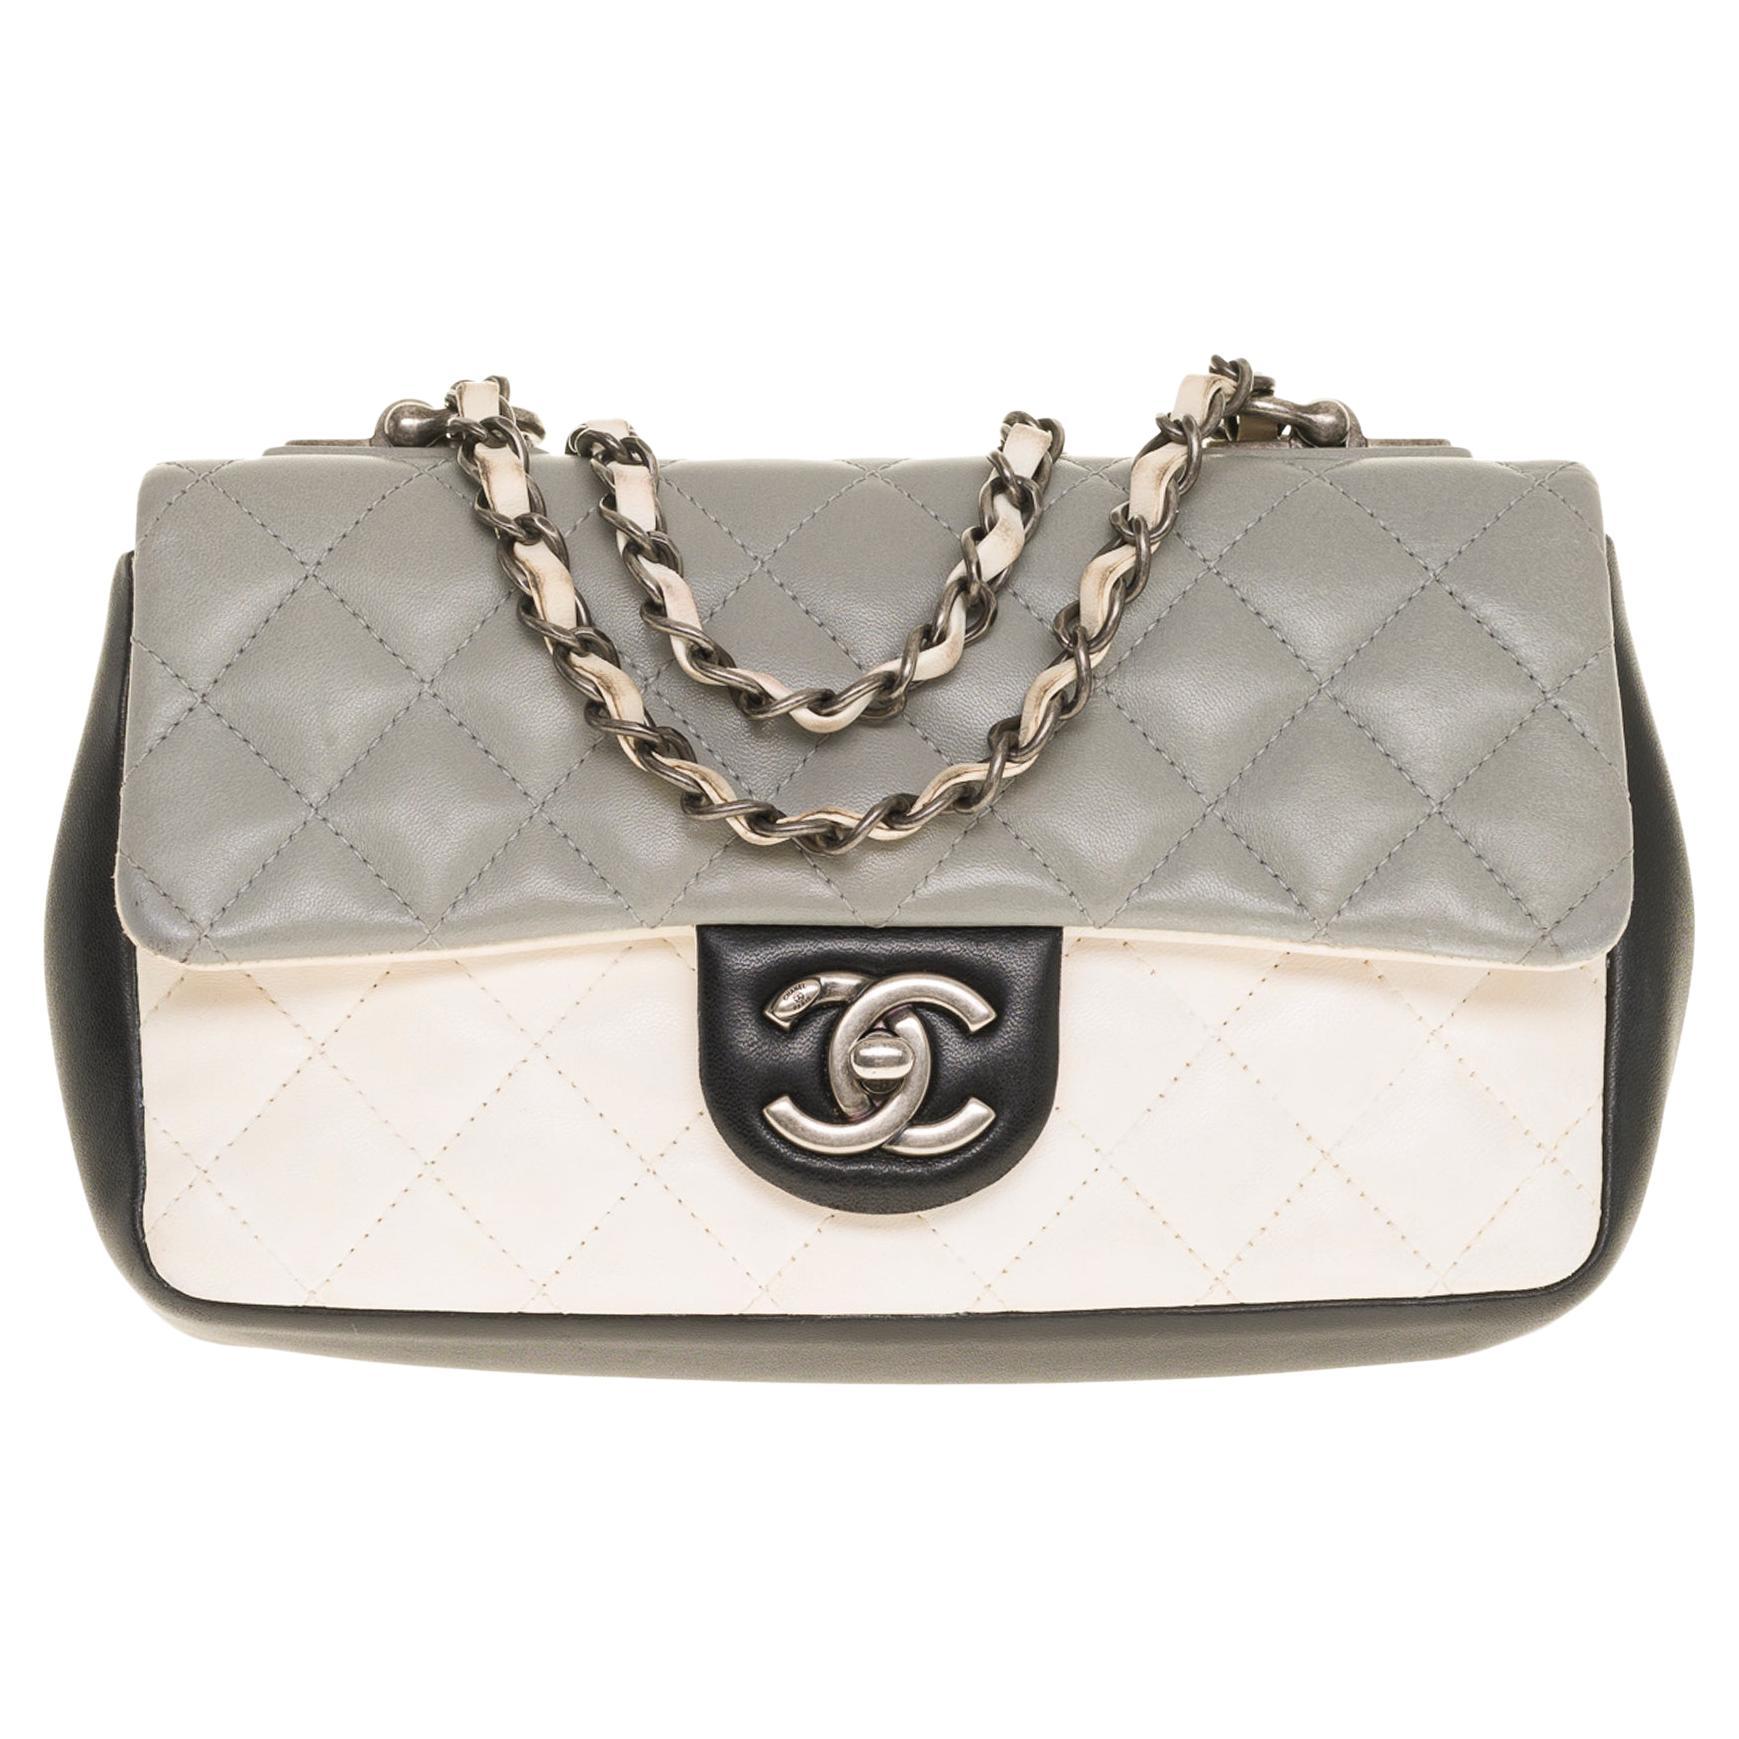 Chanel Classic single Flap shoulder bag in grey/black/white quilted lambskin,SHW